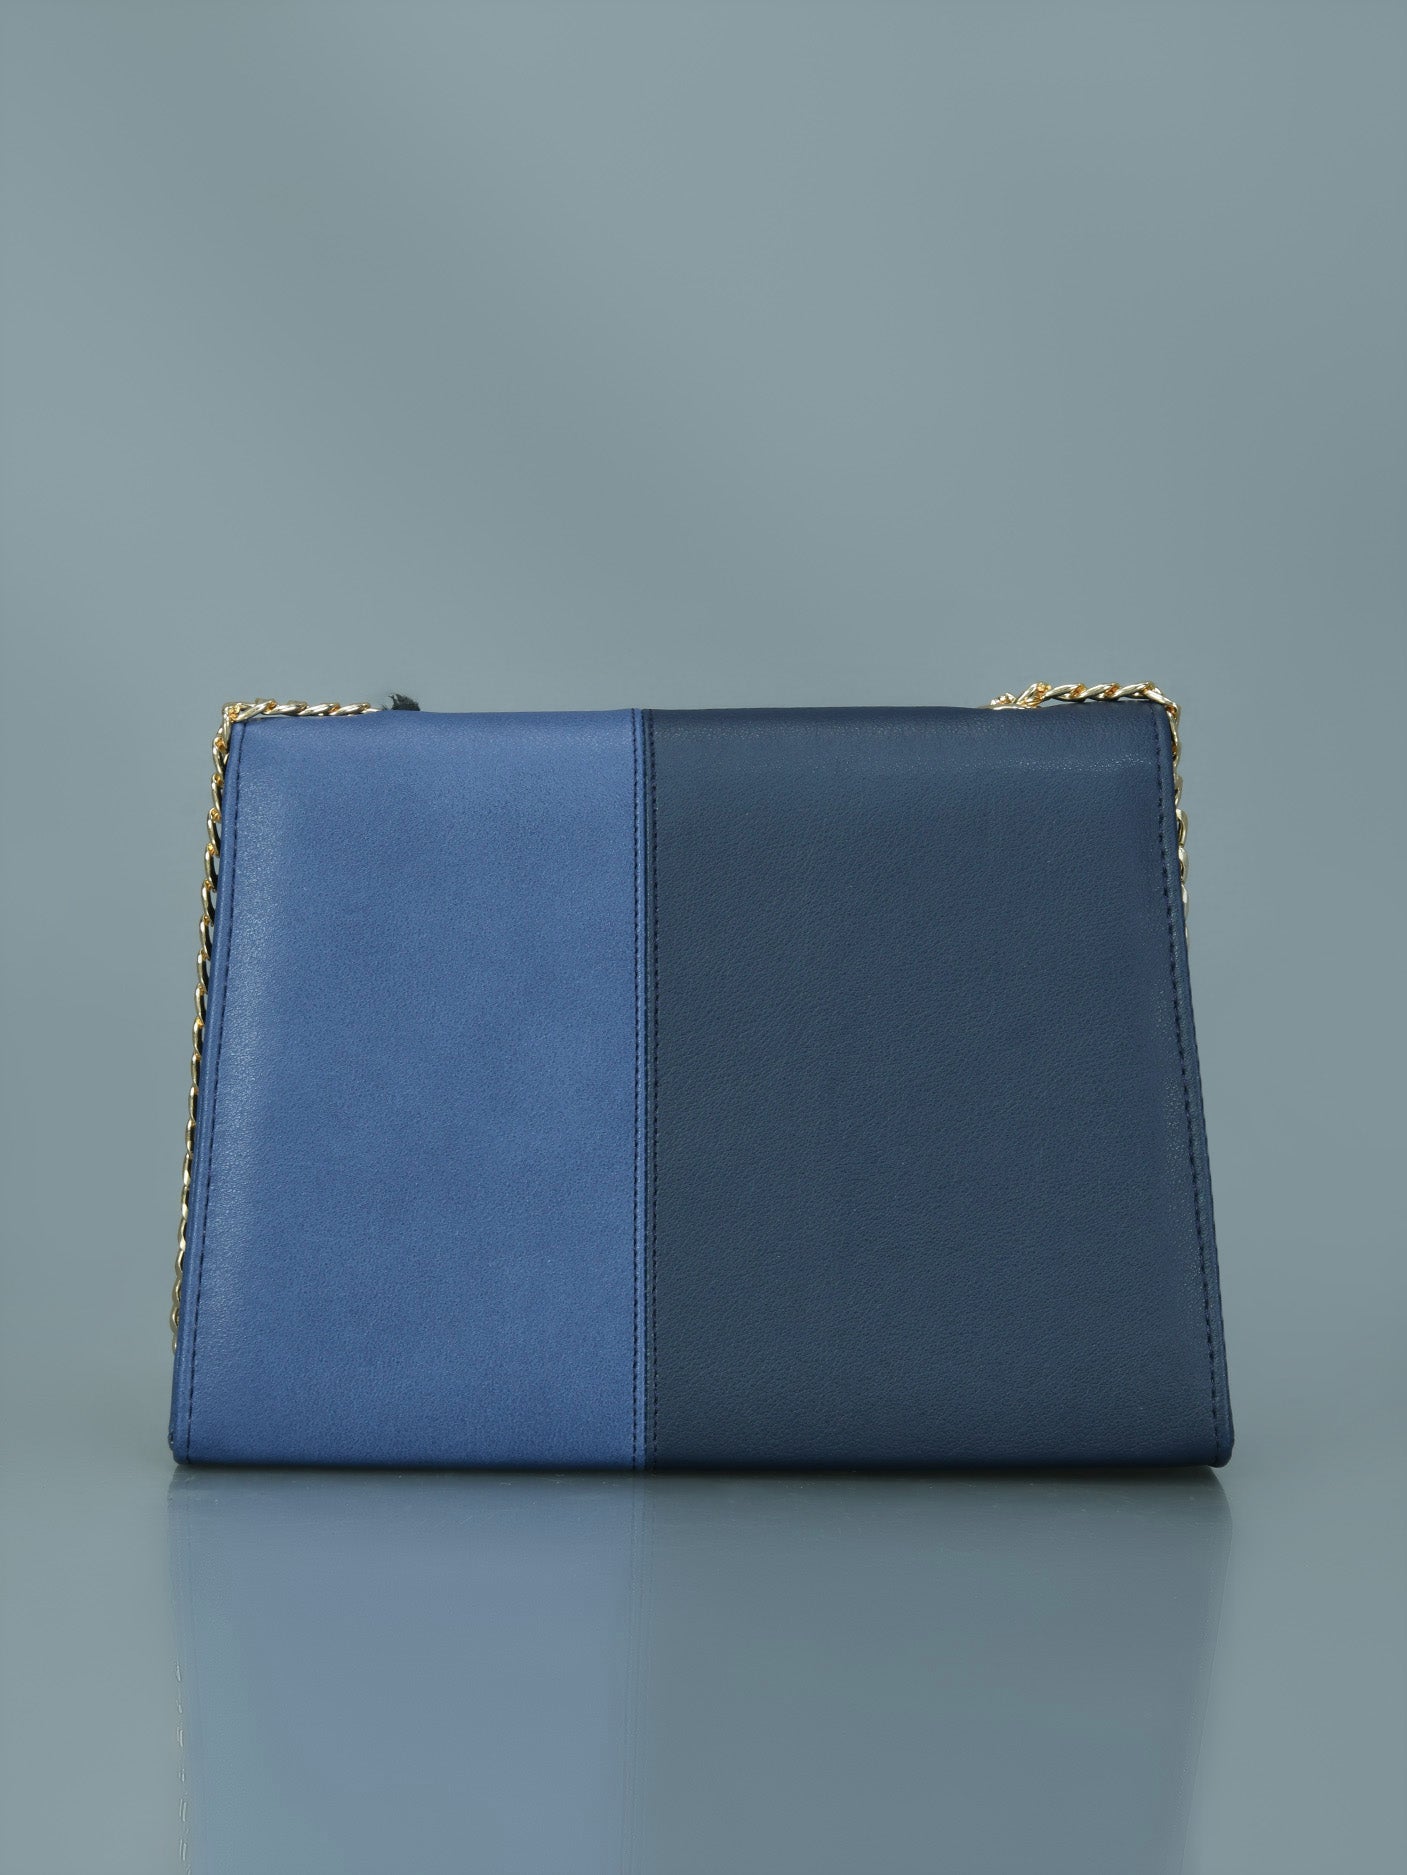 two-toned-textured-clutch